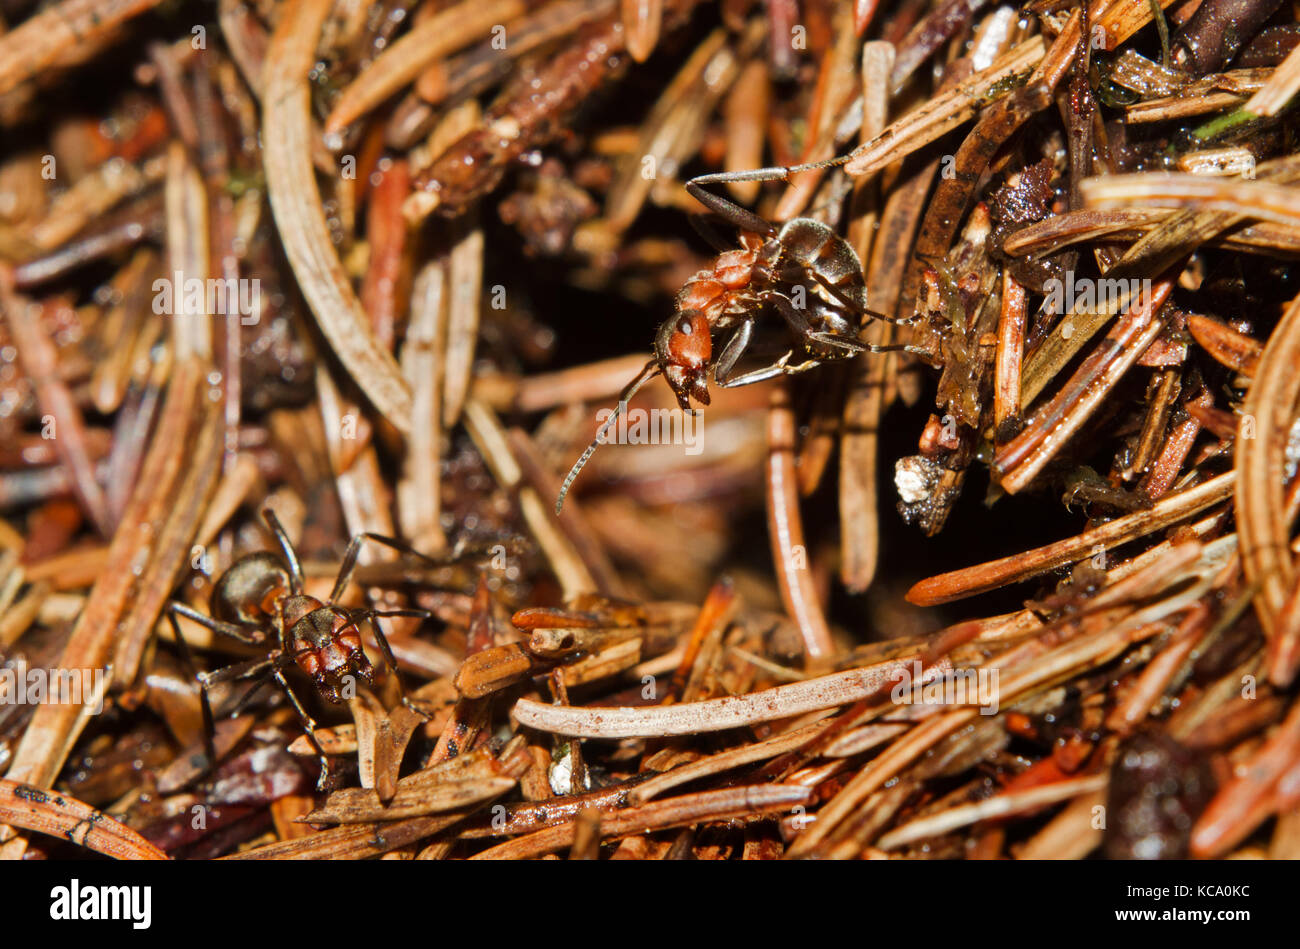 Red Wood ant making an aggressive stance, ready to spray formic acid at an attacker of its nest Stock Photo